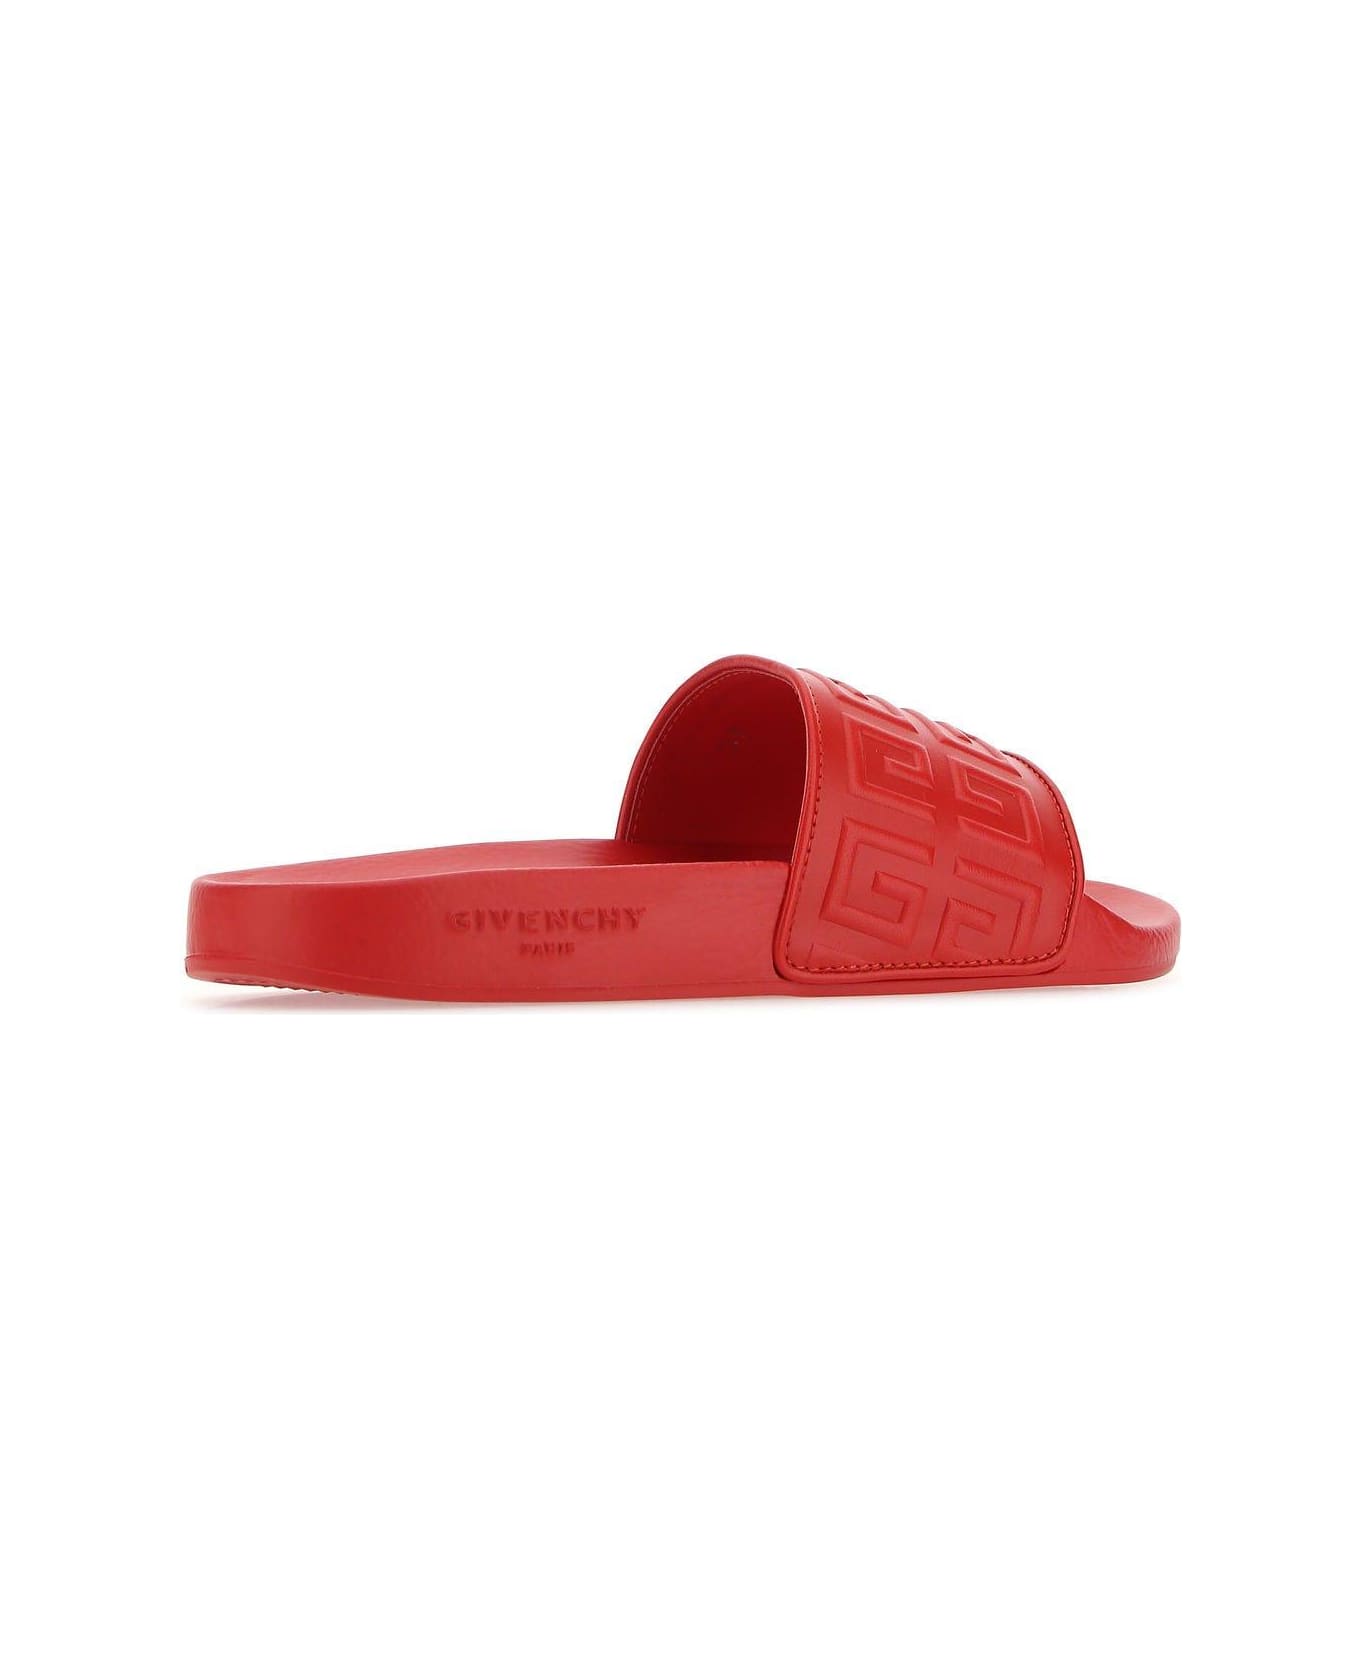 Givenchy Red Leather 4g Slippers - RED サンダル